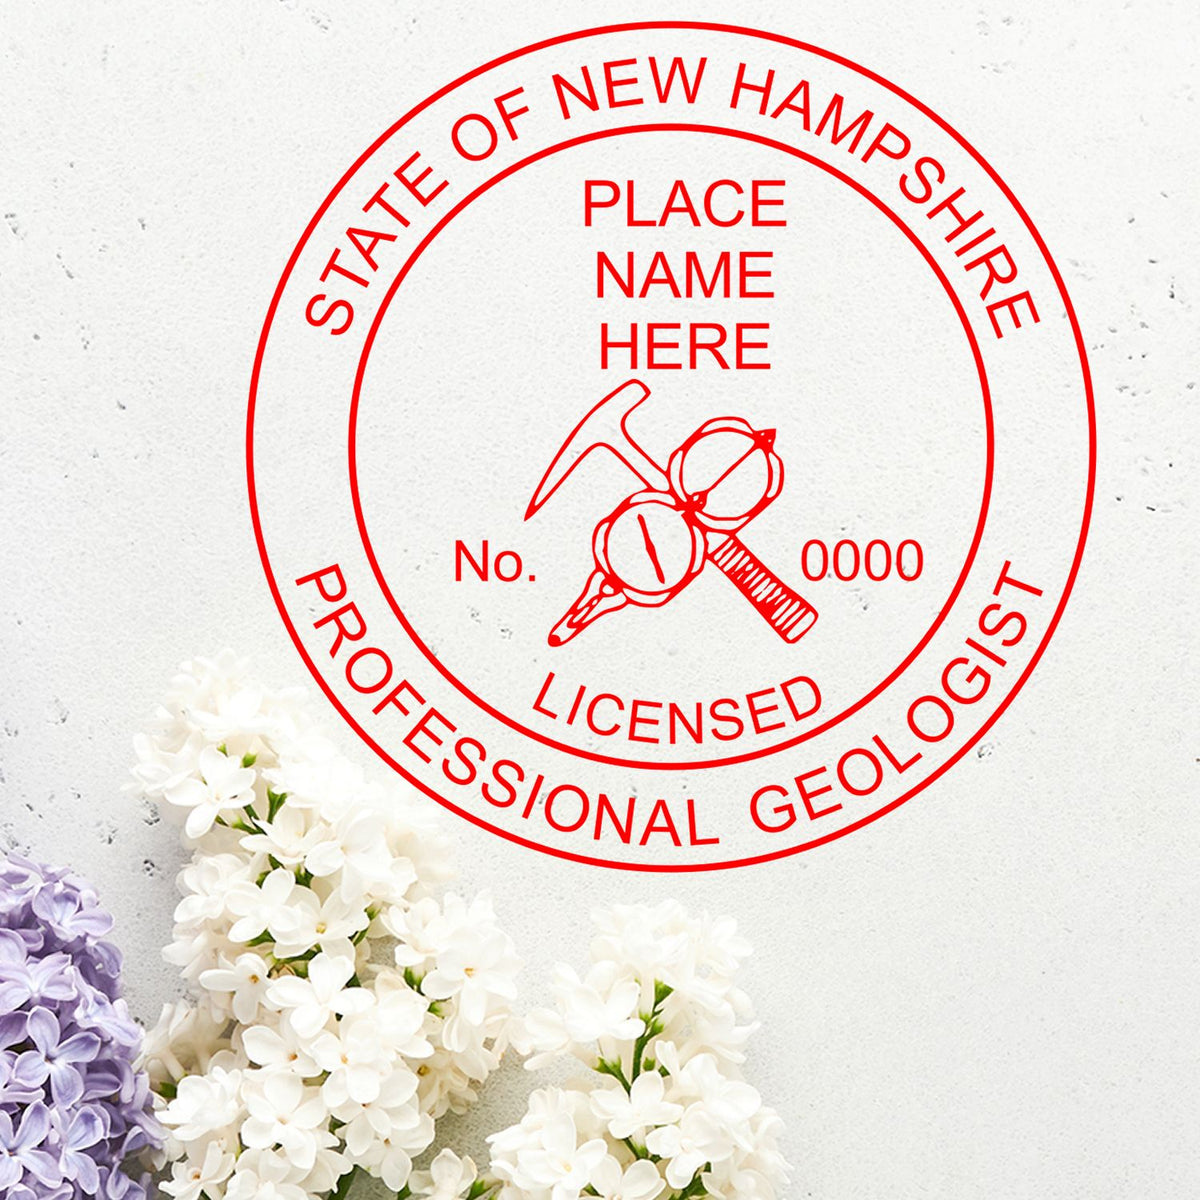 A lifestyle photo showing a stamped image of the New Hampshire Professional Geologist Seal Stamp on a piece of paper